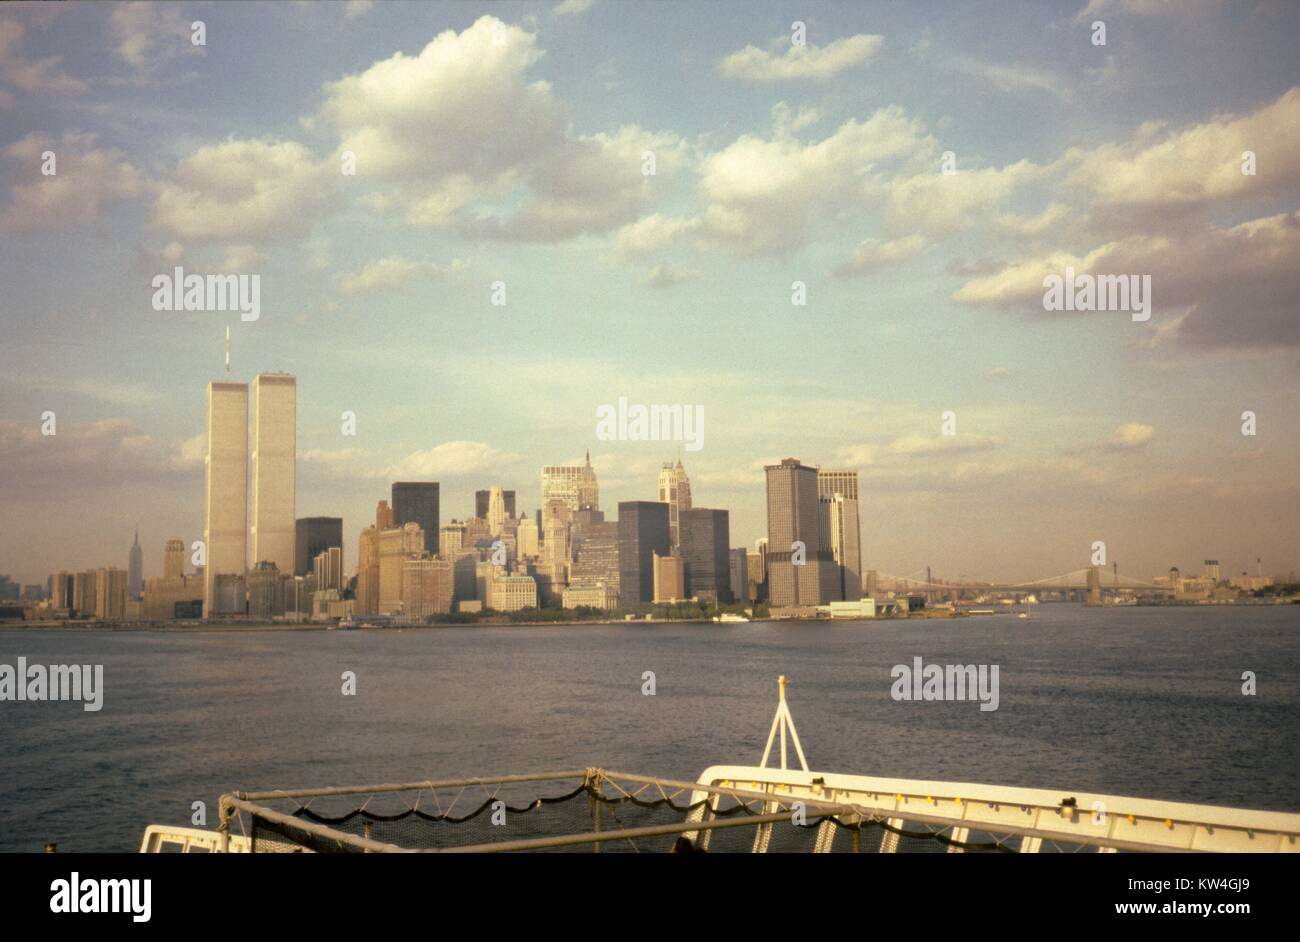 The twin towers of the World Trade center, viewed from the aft deck of the Cunard Line's Queen Elizabeth 2 cruise ship, New York City, New York, 1975. Stock Photo